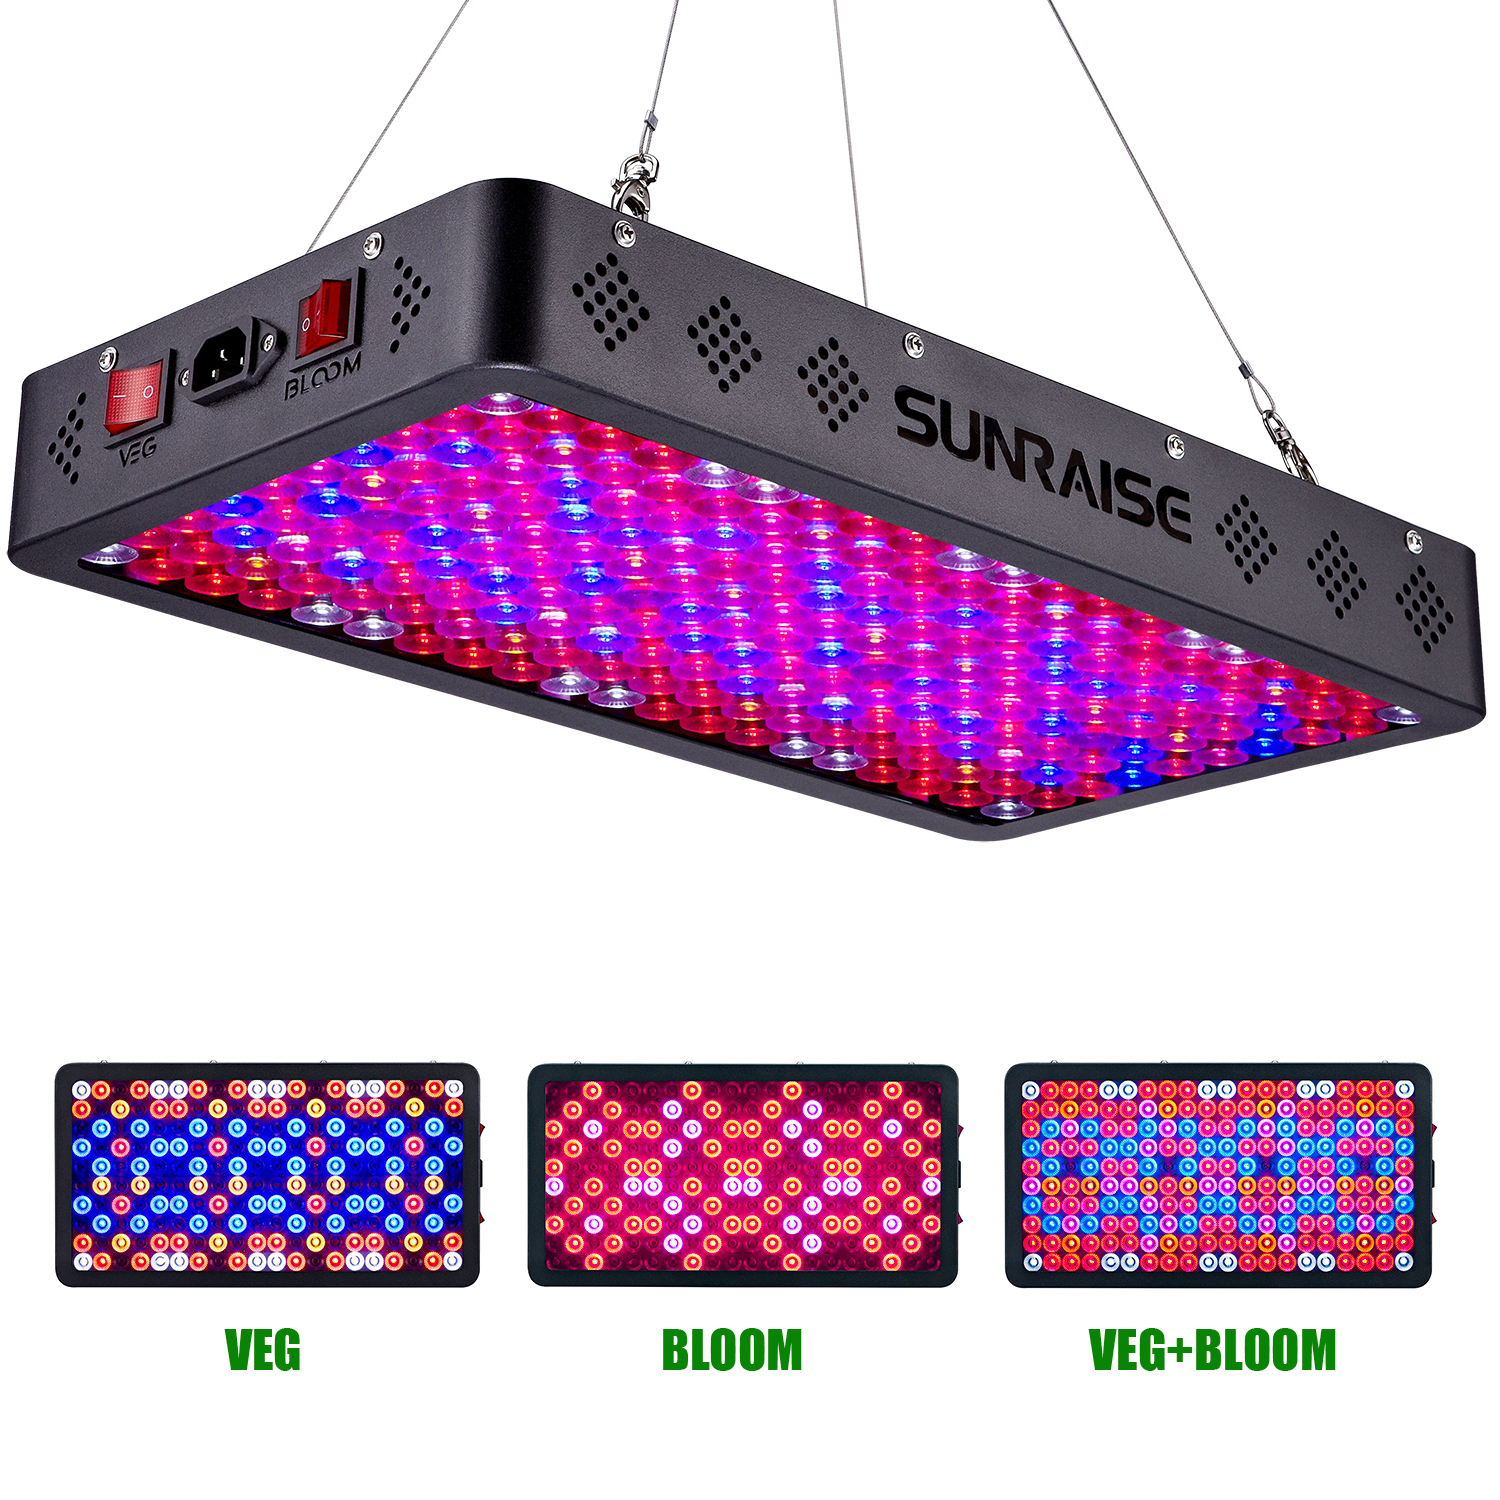 Triple-Chips & Dual Switch Full Spectrum 2000w LED Grow Light for Indoor Plants 